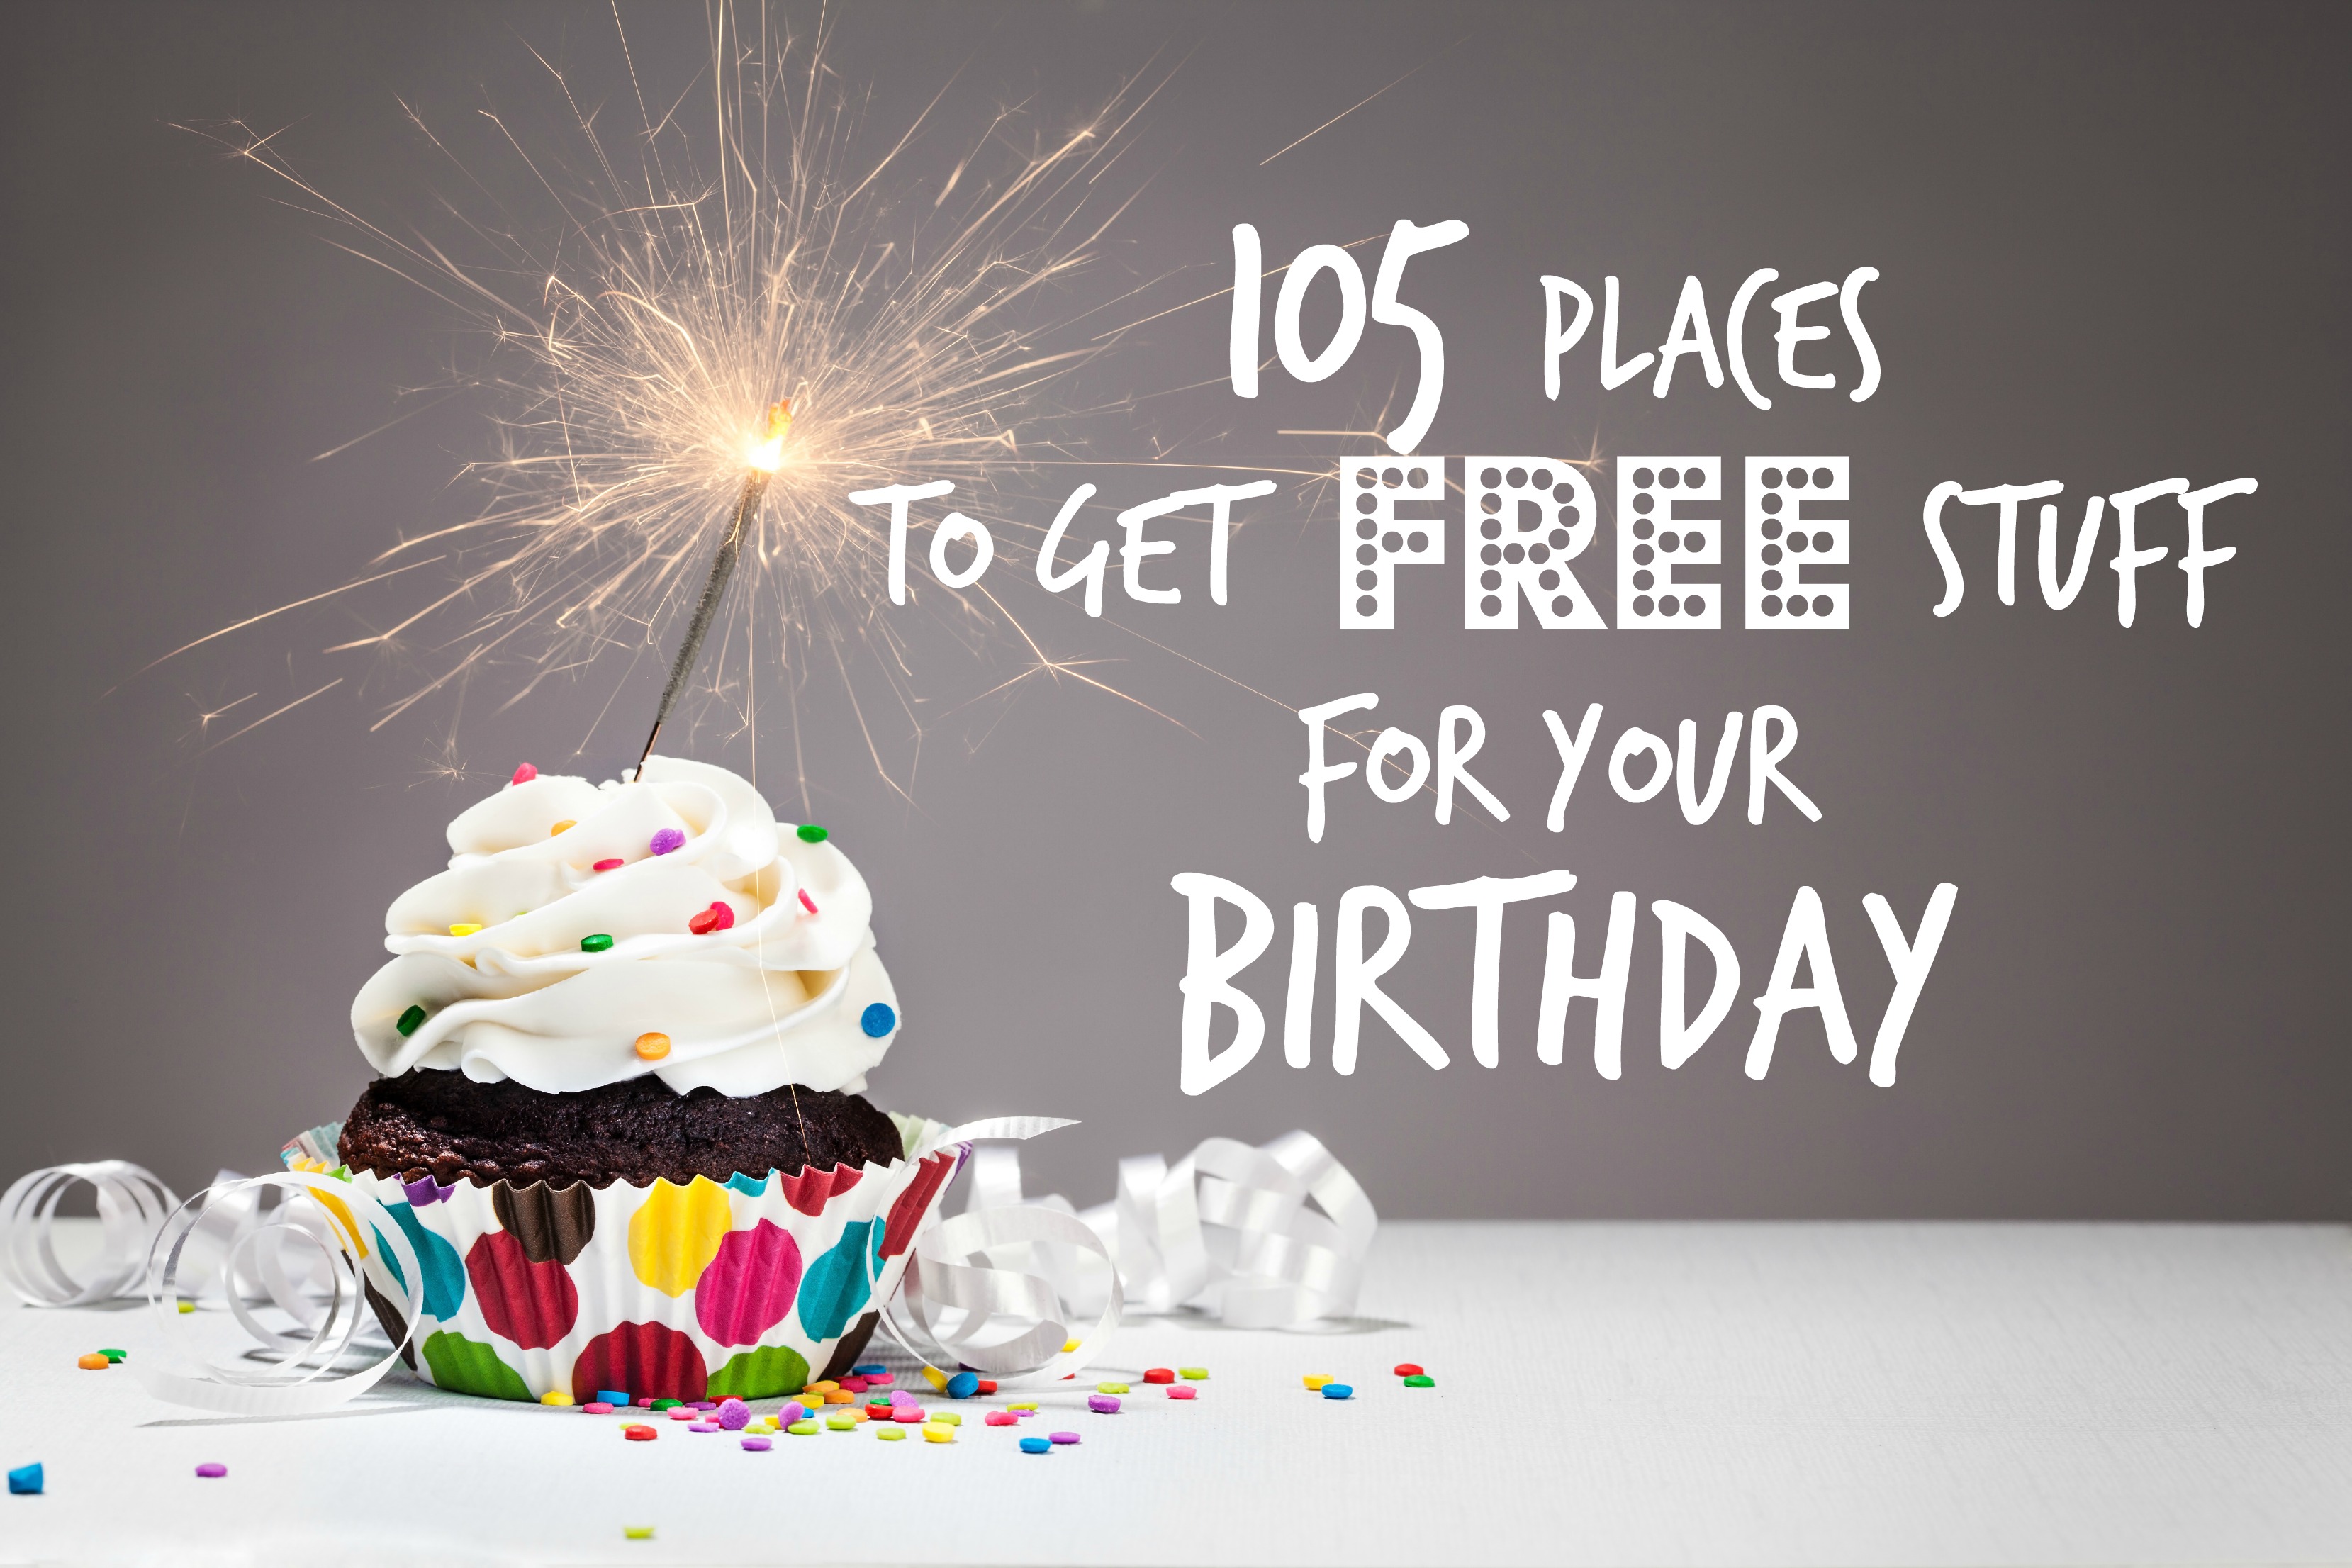 Birthday Freebies 105 Places to Get Free Stuff for Your Birthday